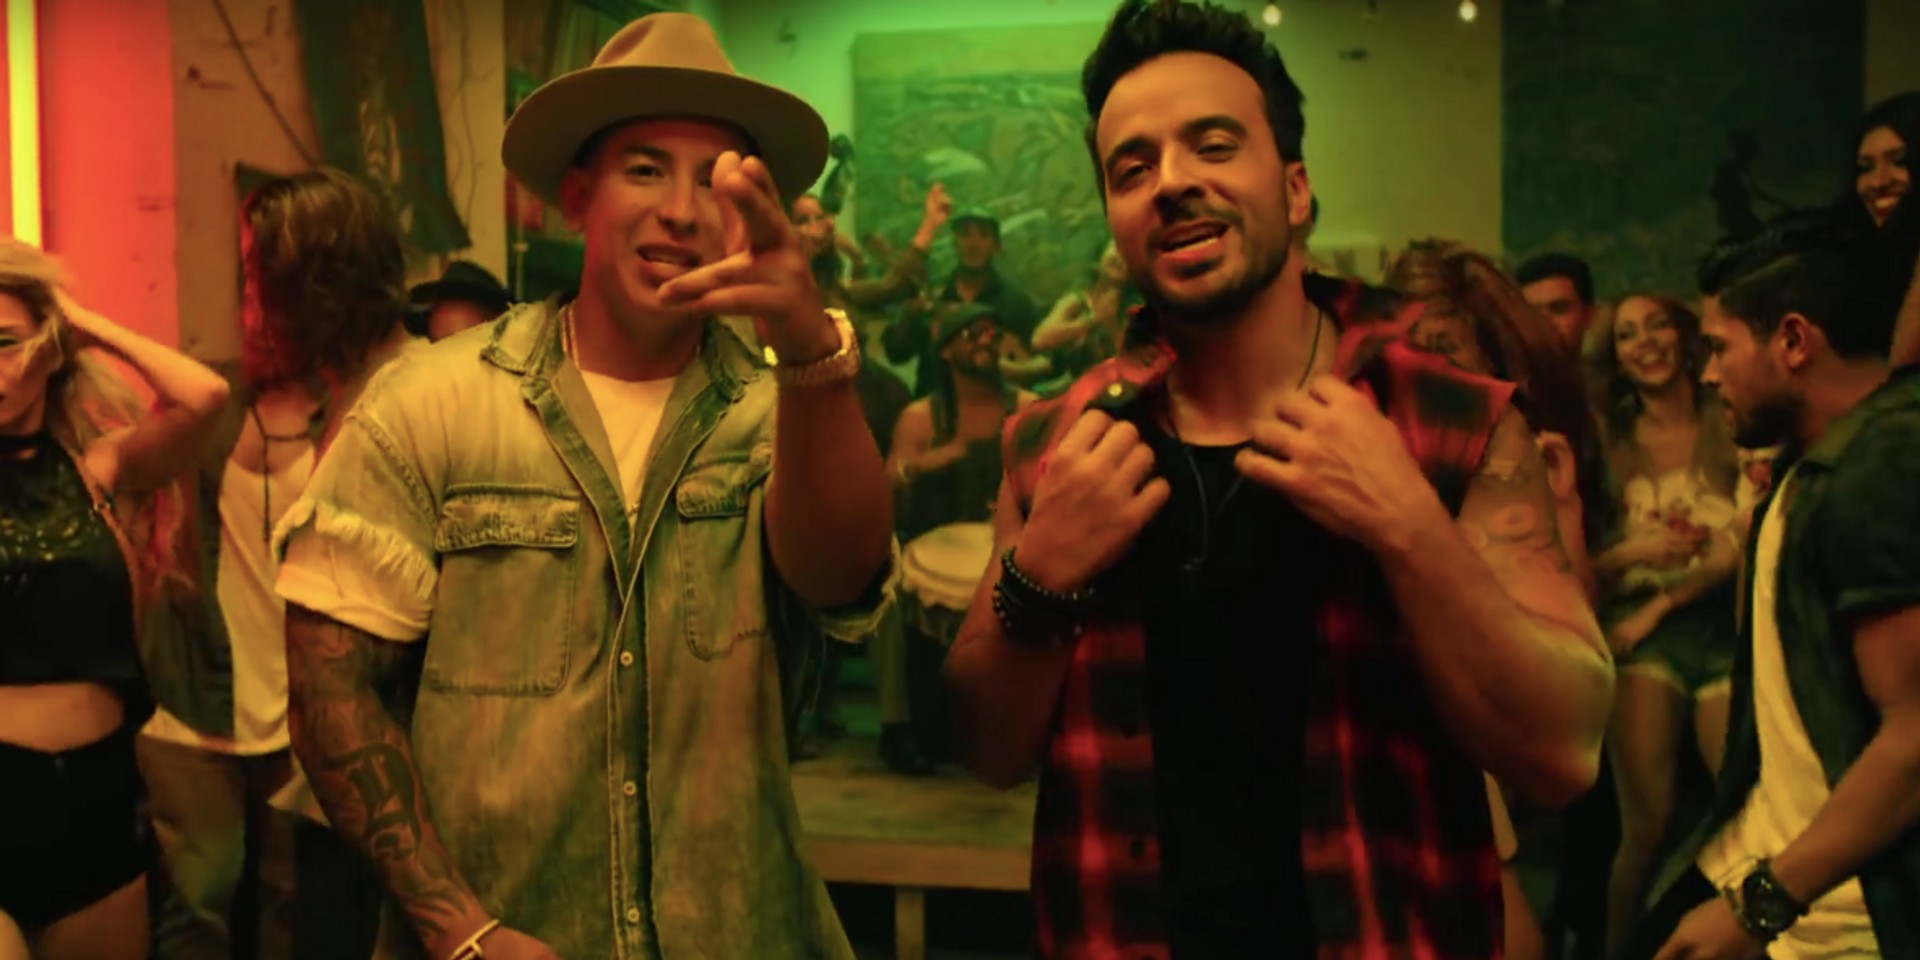 'Despacito' music video briefly removed from YouTube by hackers